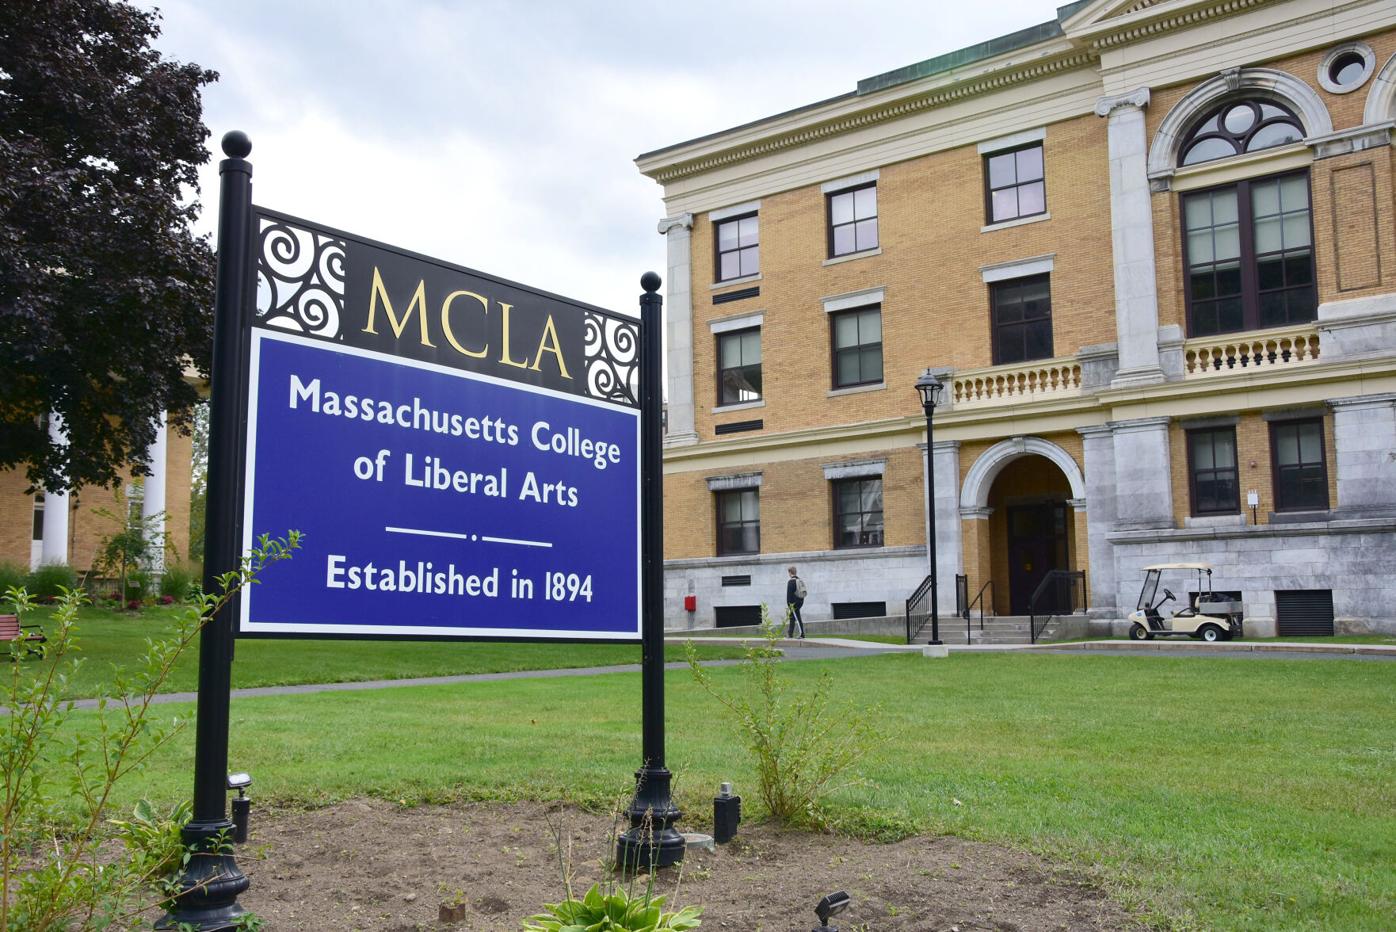 Mcla Waiving Some Testing Requirements In Response To Pandemic | Local News | Berkshireeagle.com